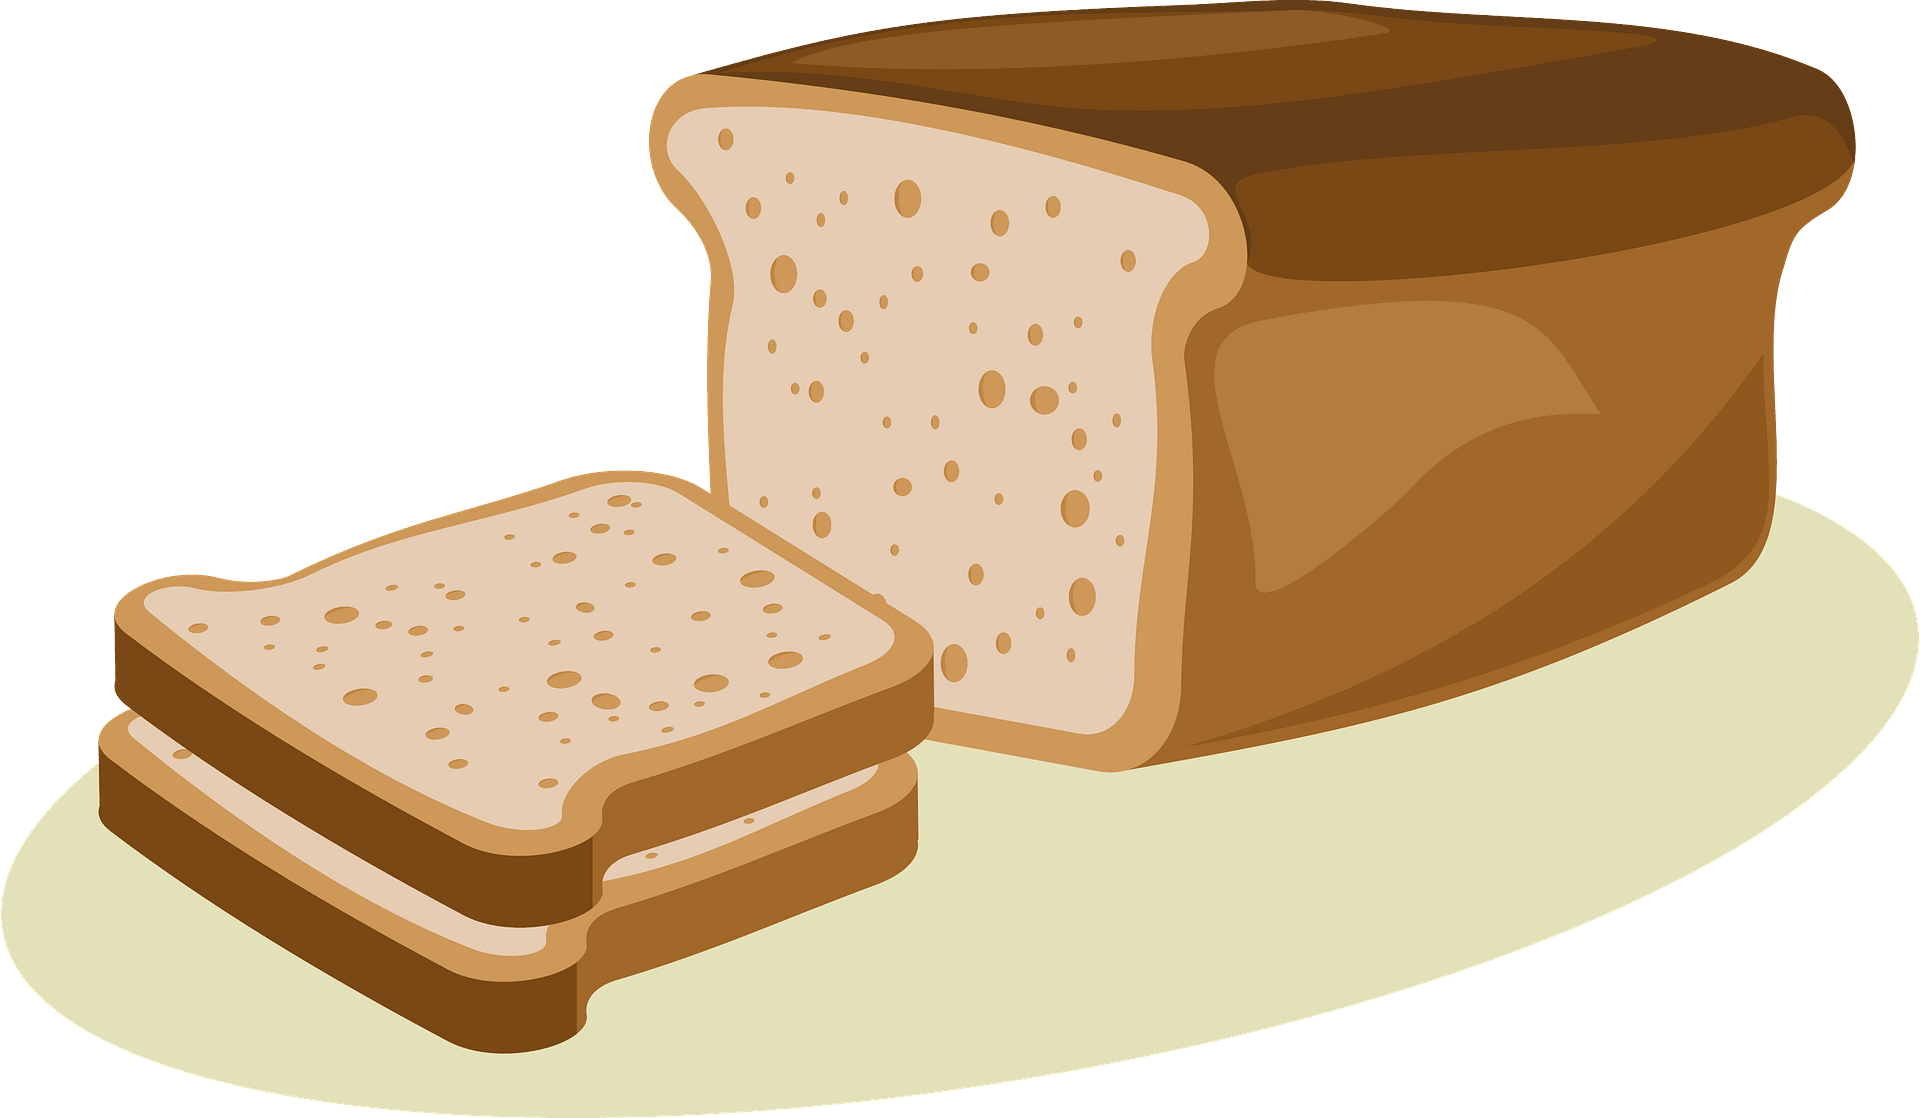 Slices Wheat Bread Download Free Image PNG Image